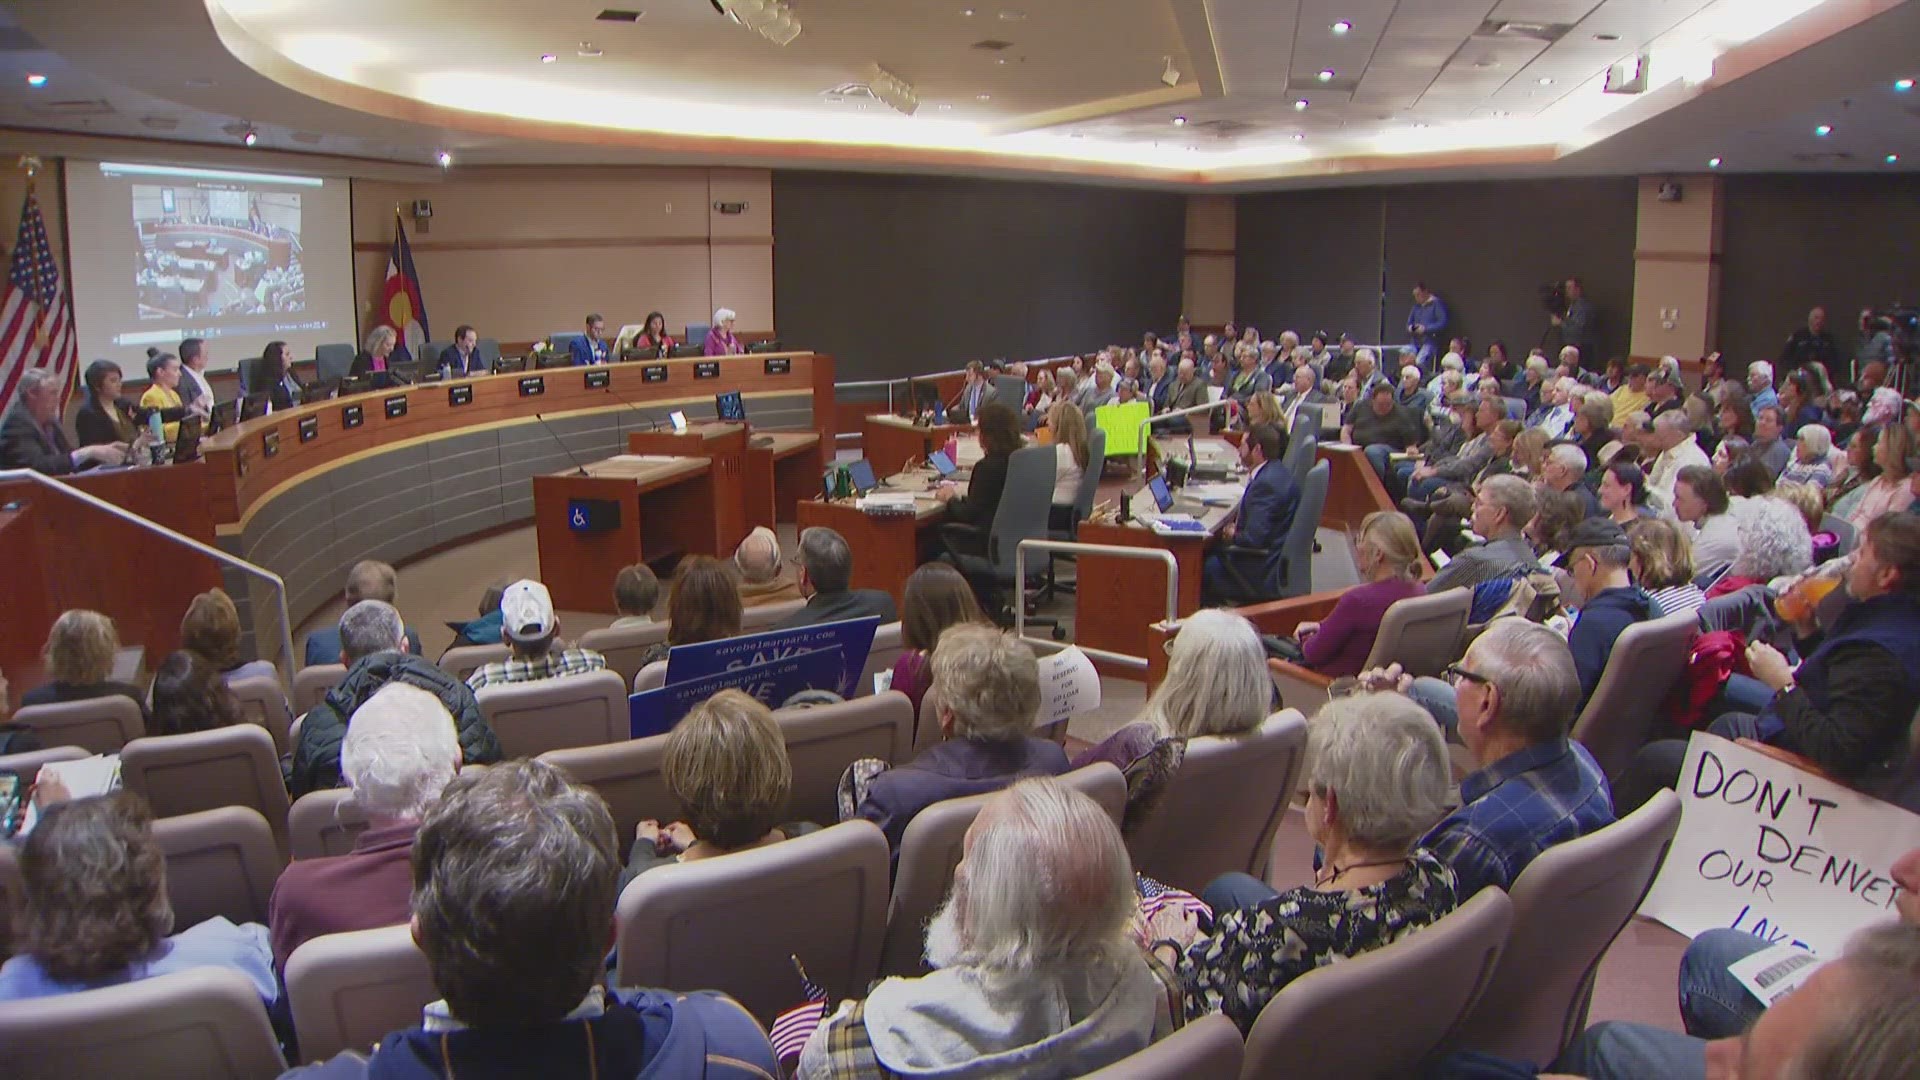 False claims brought more than 100 people to a city council meeting Monday night.